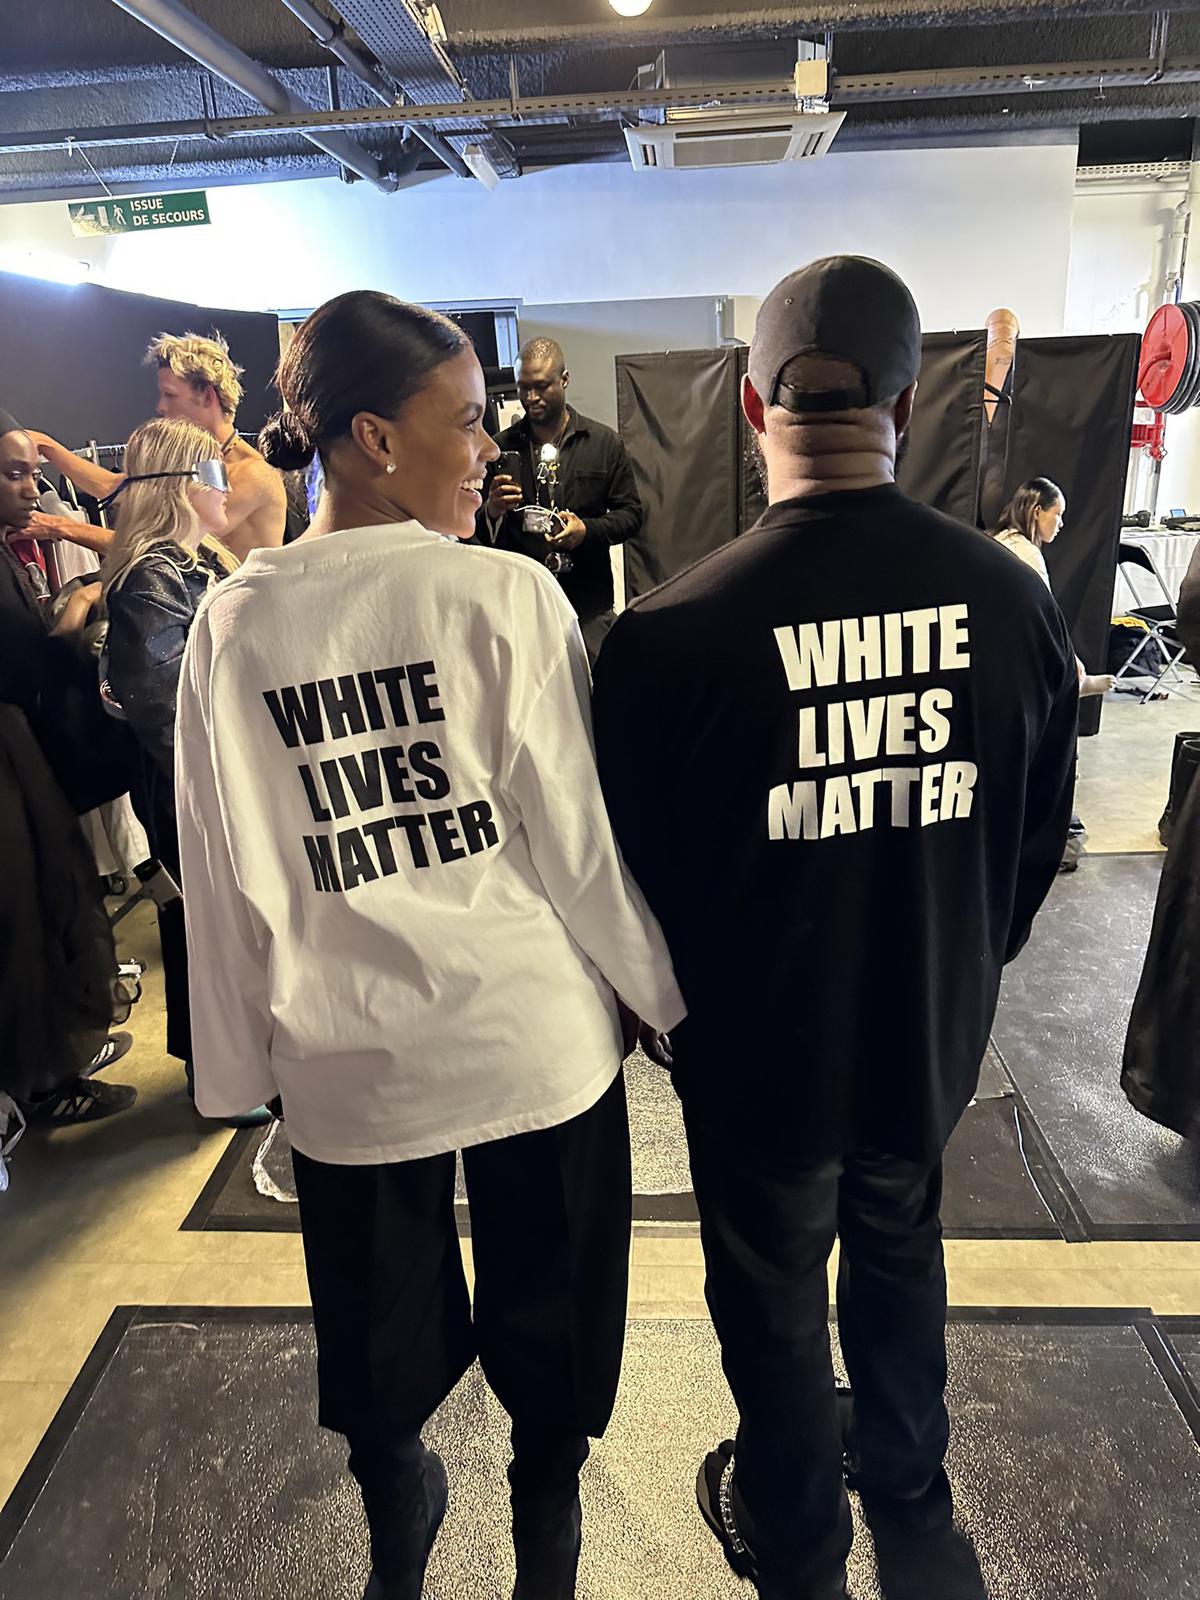 Kanye West sparked controversy this week at Paris Fashion Week when he was pictured wearing a “White Lives Matter” T-shirt.